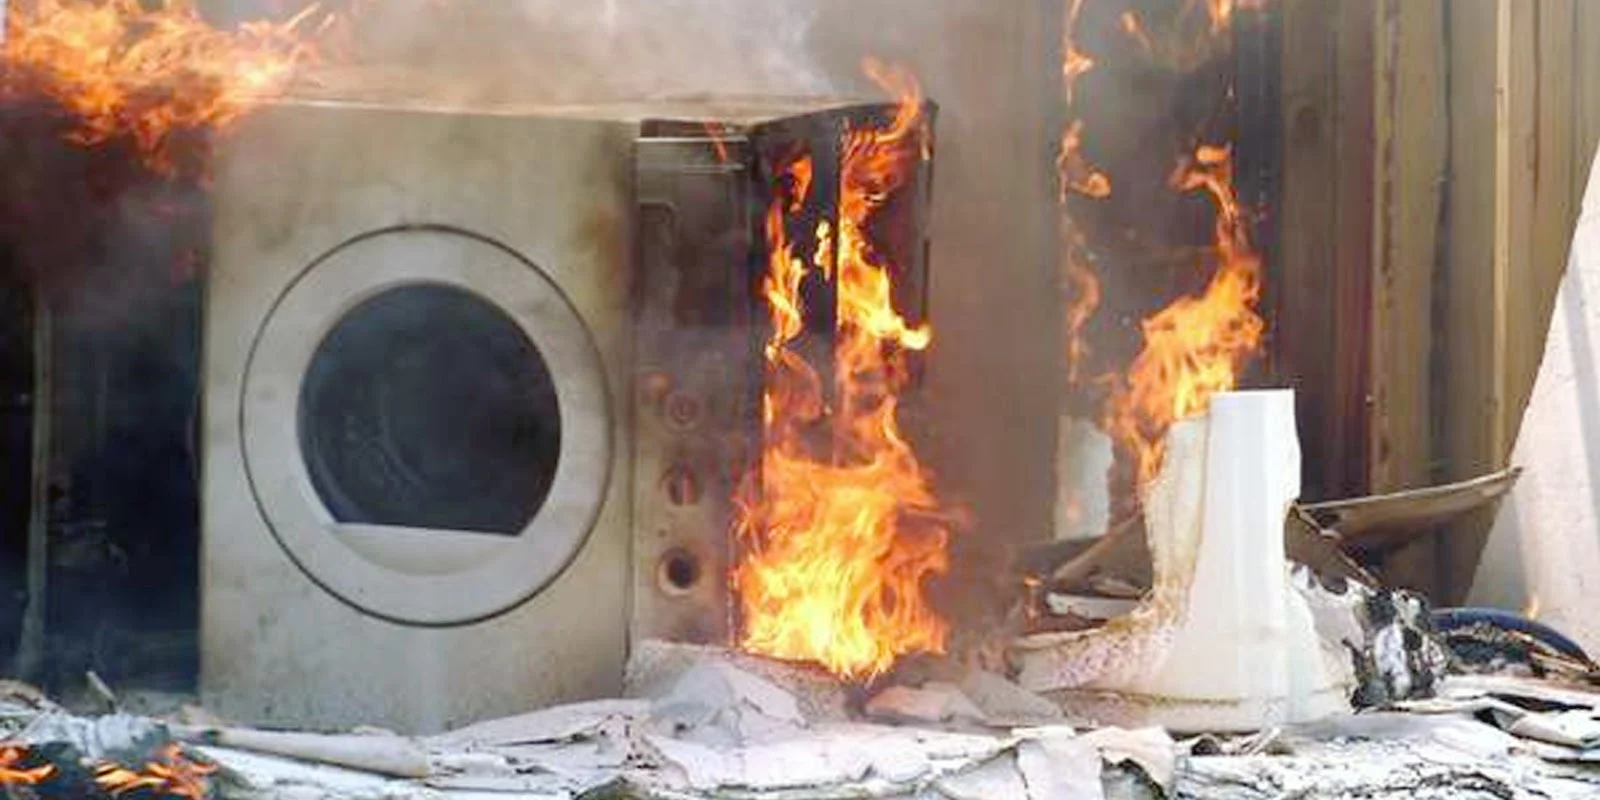 dryer vent causes fire